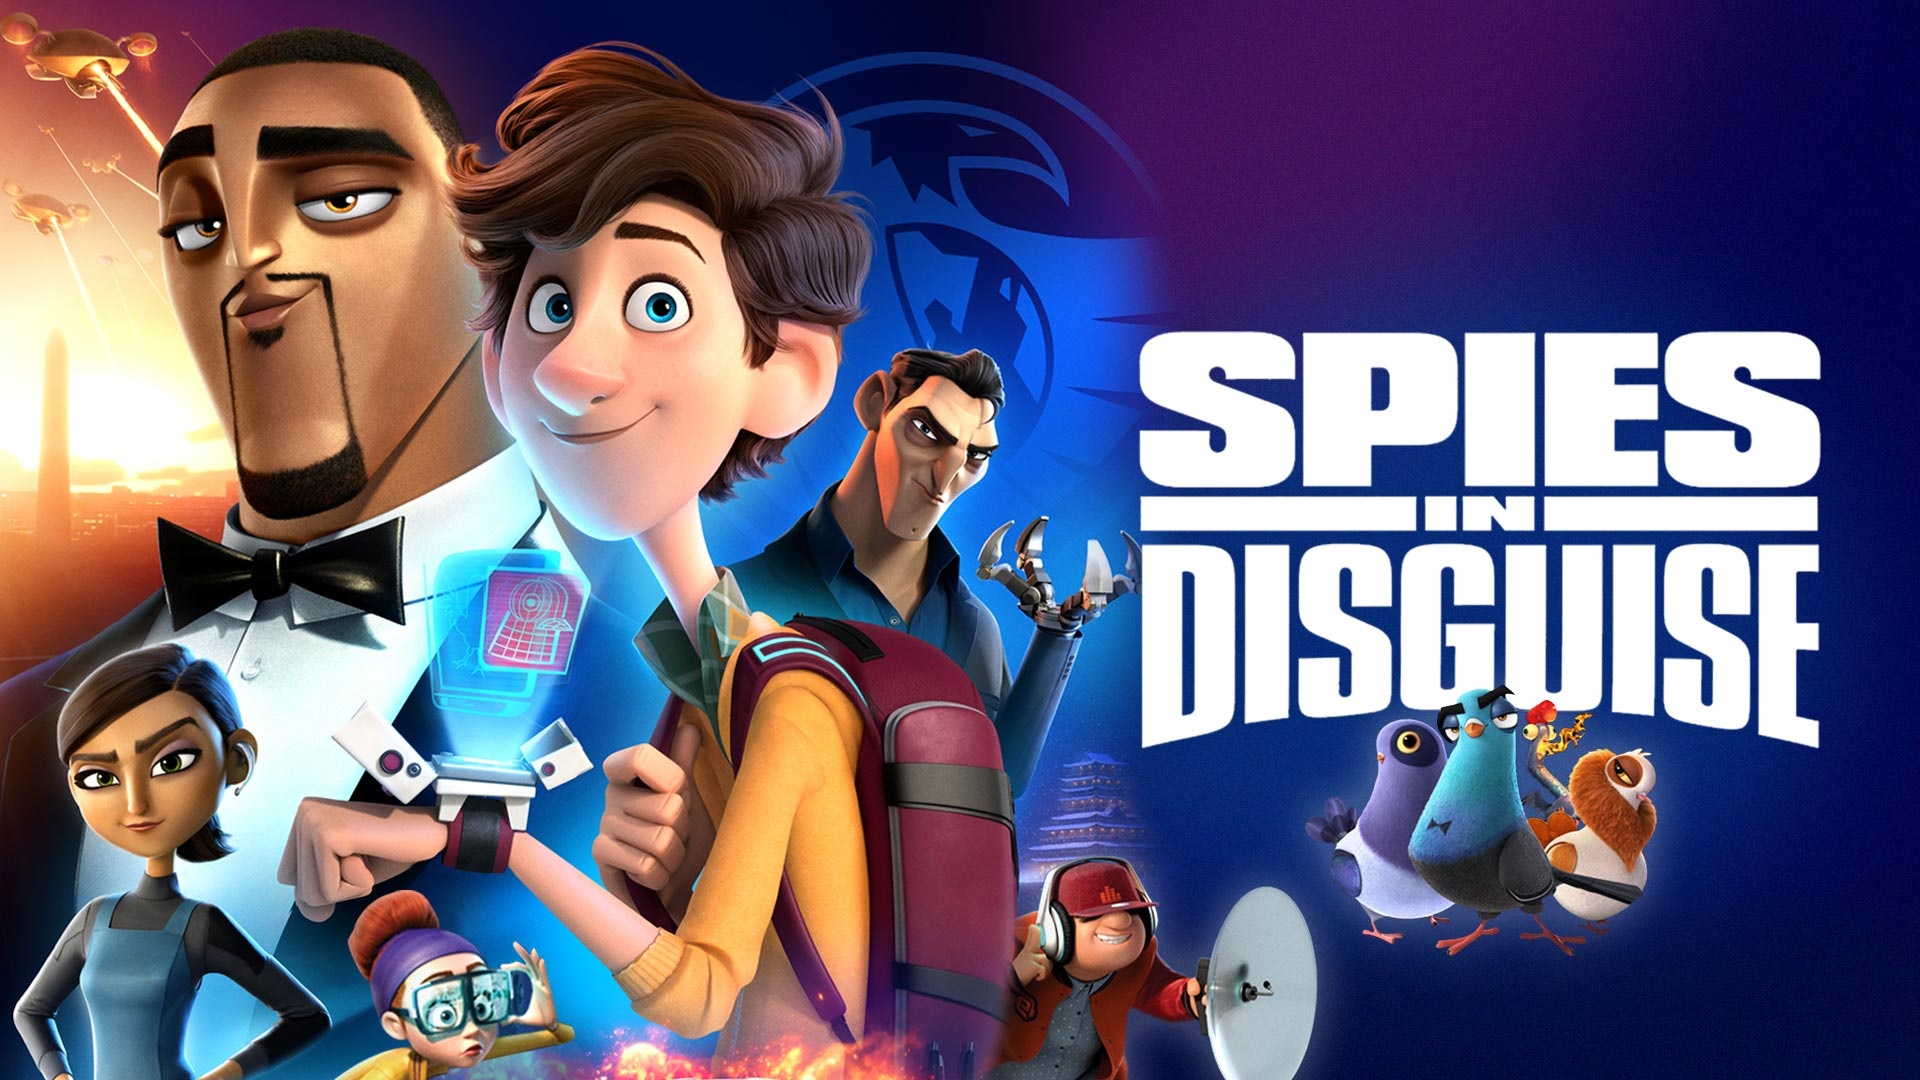 Spies in Disguise, Animated spy film, Will Smith, Tom Holland, 1920x1080 Full HD Desktop